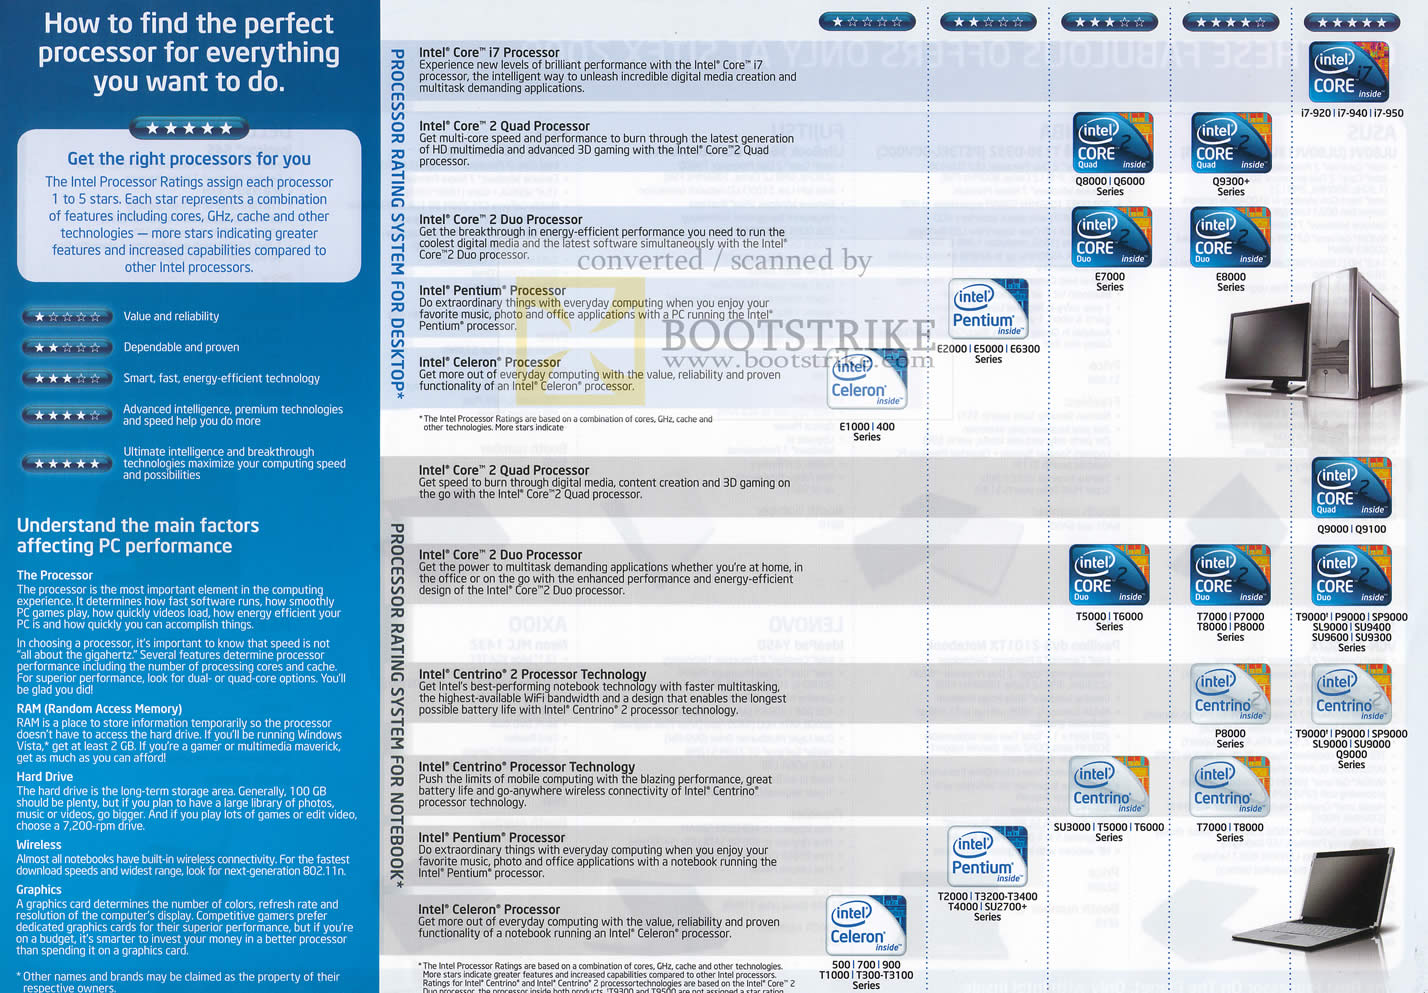 Sitex 2009 price list image brochure of Intel Processor Performance Differences